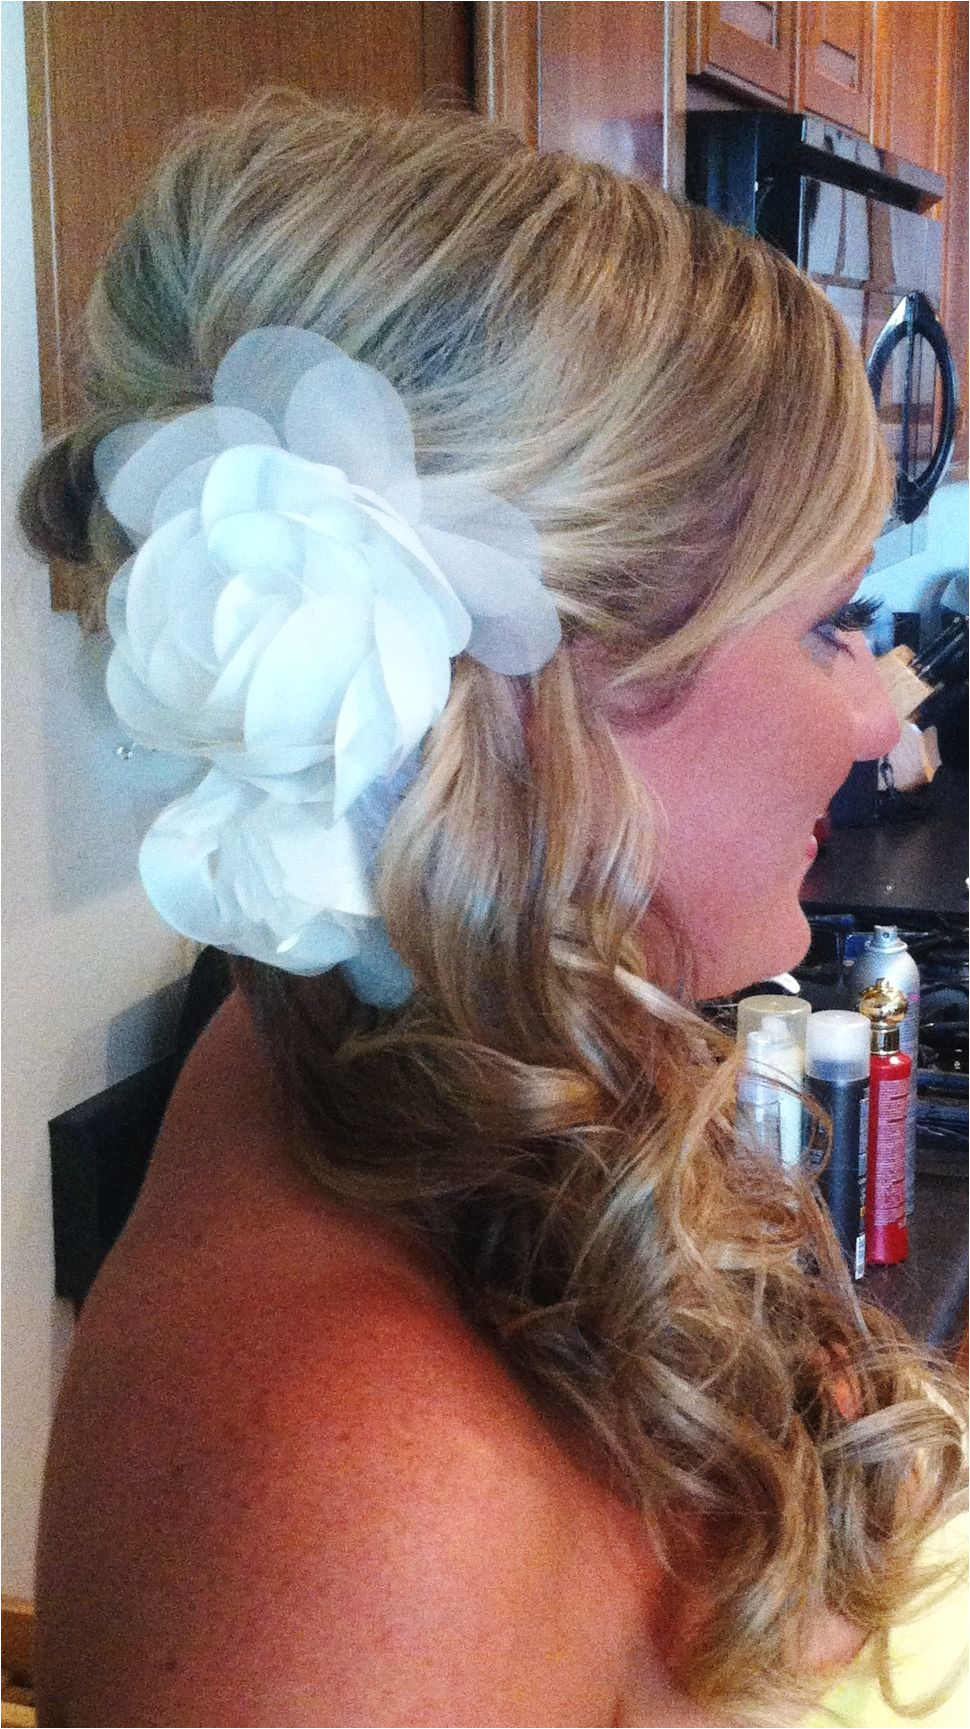 Wedding Hairstyles Off to the Side Bridal Updo Off to the Side Ponytail with White Accessory